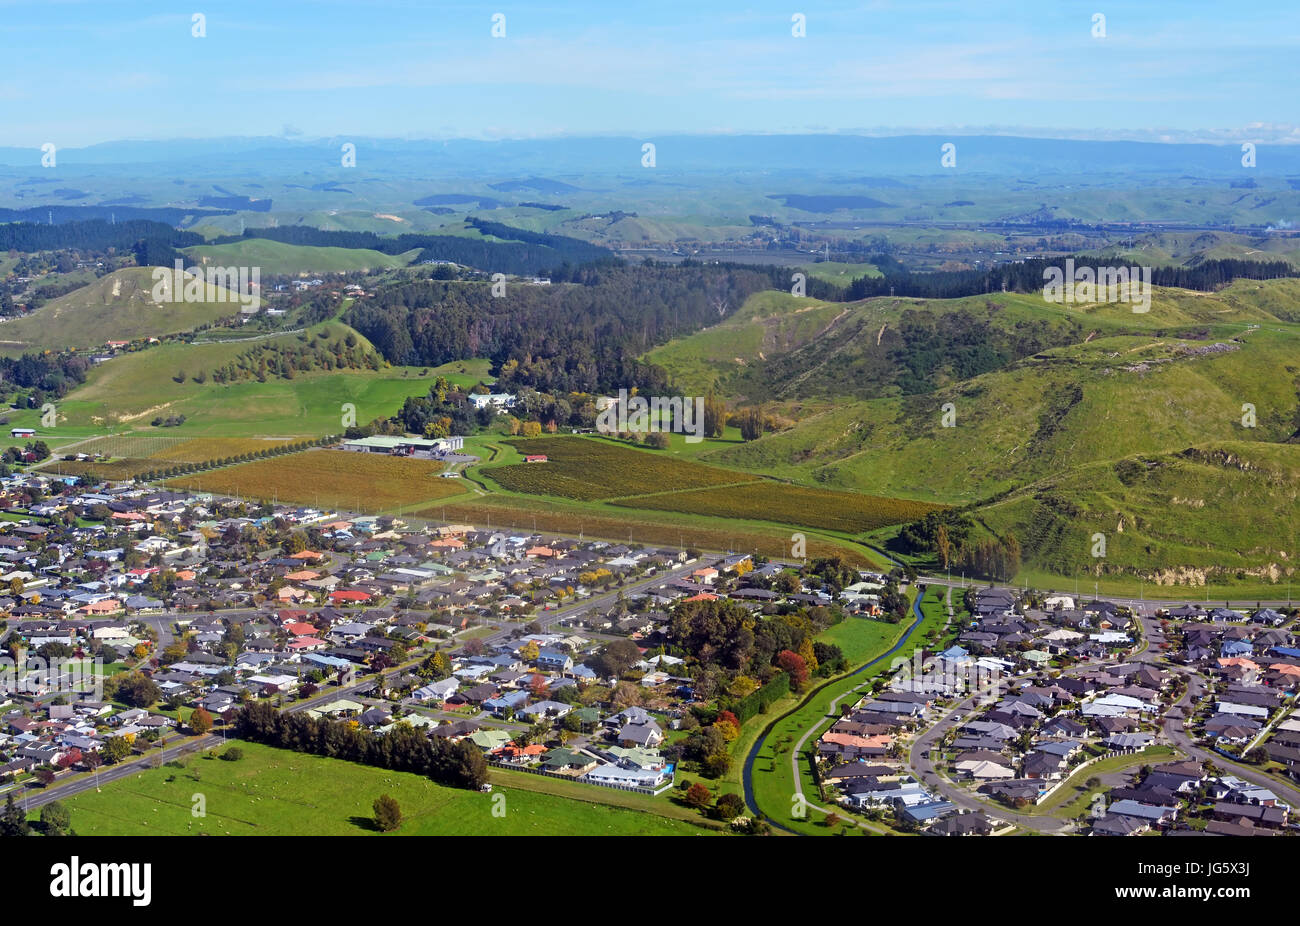 Taradale and the Mission Estate Winery Aerial View in Napier, Hawkes Bay, New Zealand. Stock Photo